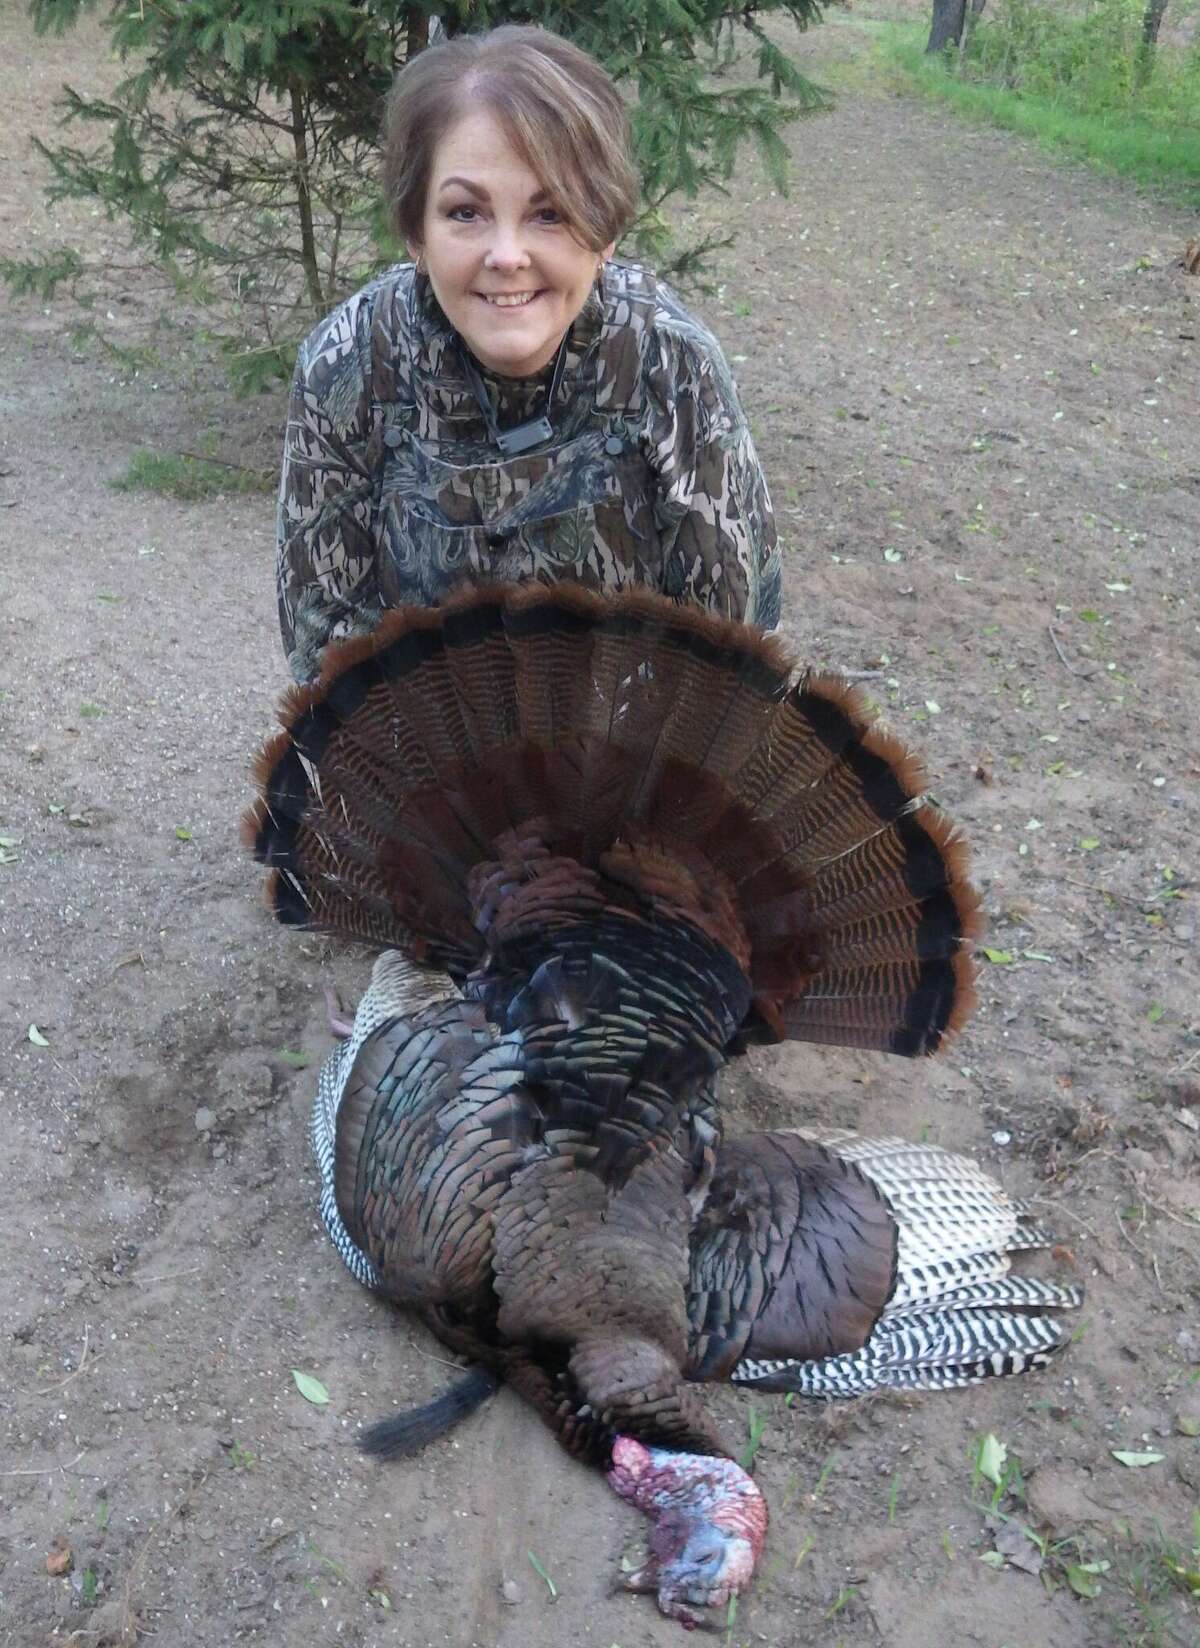 Deb Robinson of Macomb shot this nice gobbler that was called in by her guide Tom Lounsbury during a Becoming an Outdoors Woman (BOW) turkey hunting seminar in the Thumb.